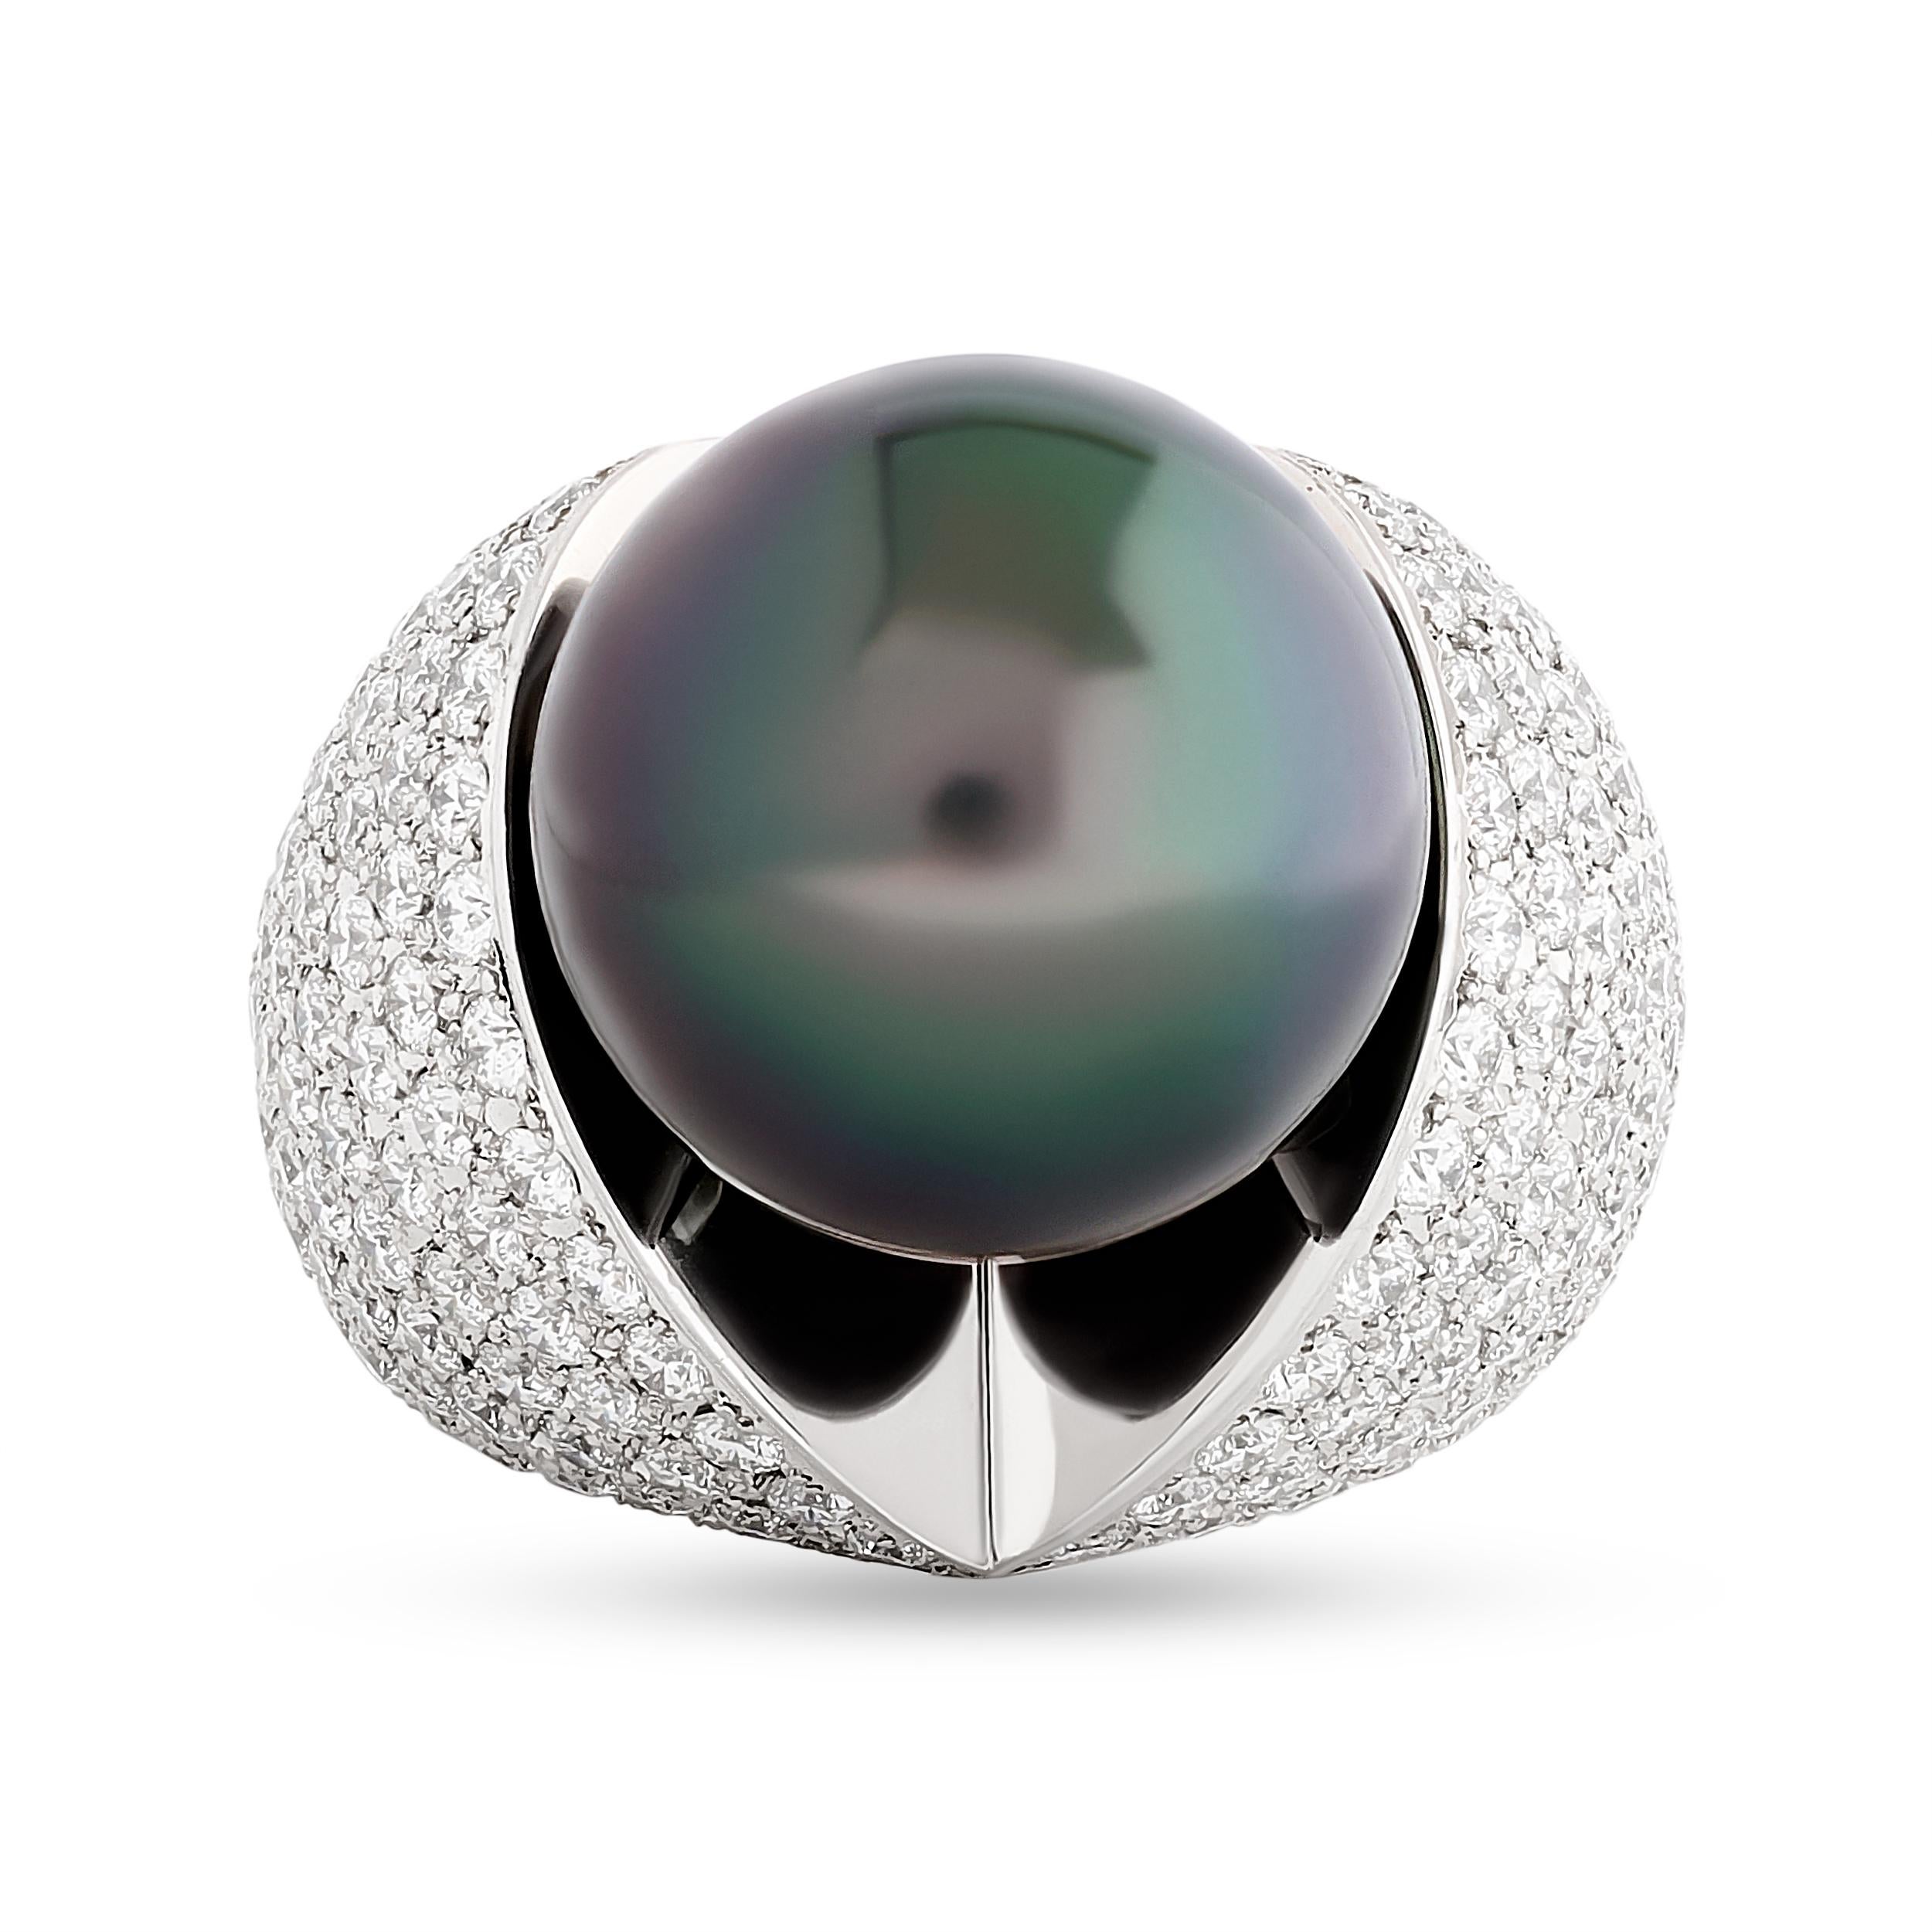 A Mikimoto black pearl, accentuated by a ring of pave, sparkling diamonds. 
The black pearl is approximately 16.00 millimeters. The total diamond weight is approximately 6.78 carats; color F-G and clarity VS. 

Ring size US 6.50
Signed with the